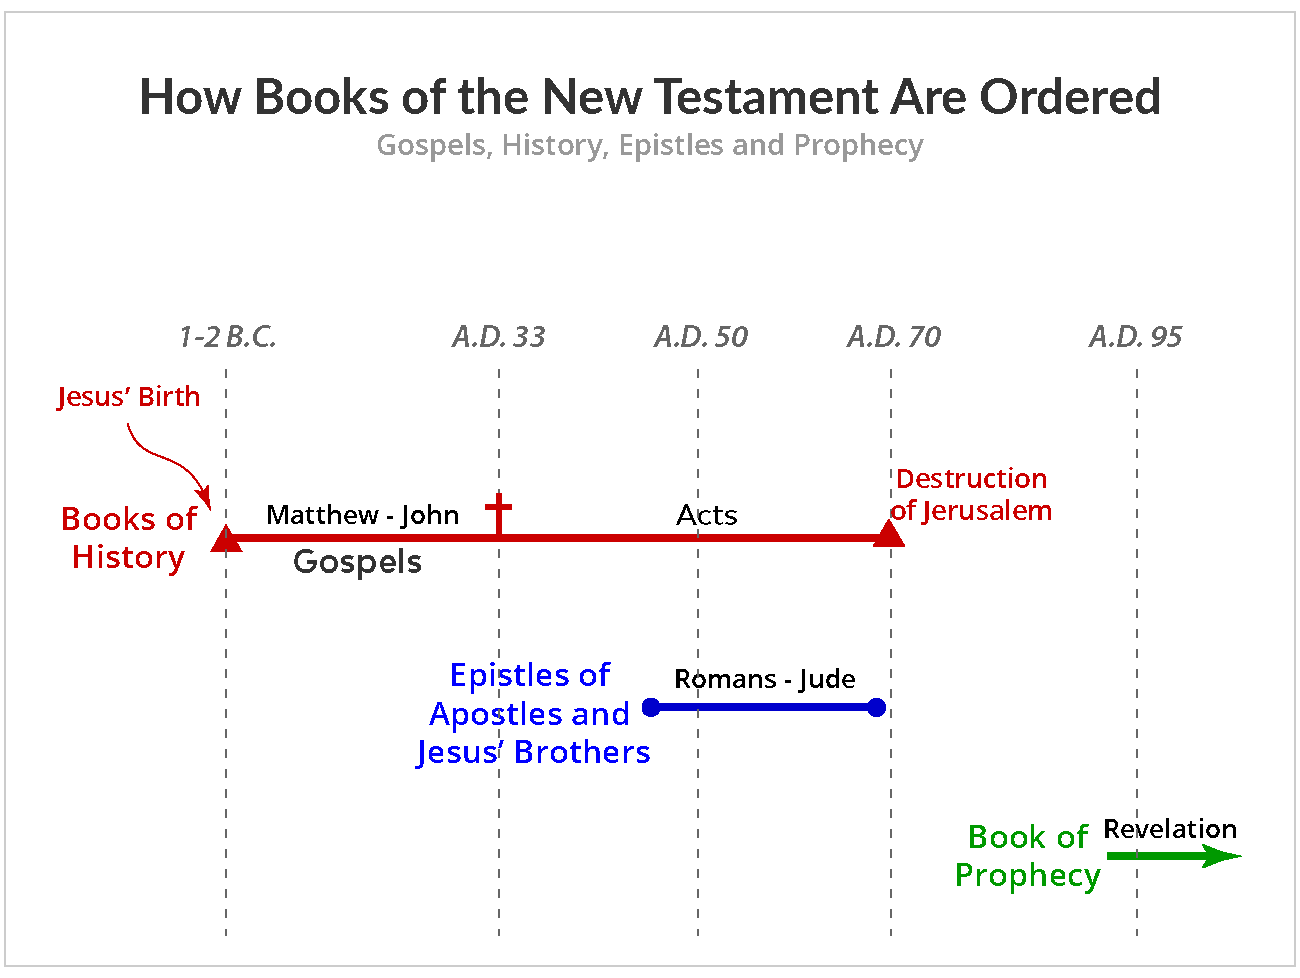 How Are the Books of the New Testament Are Ordered